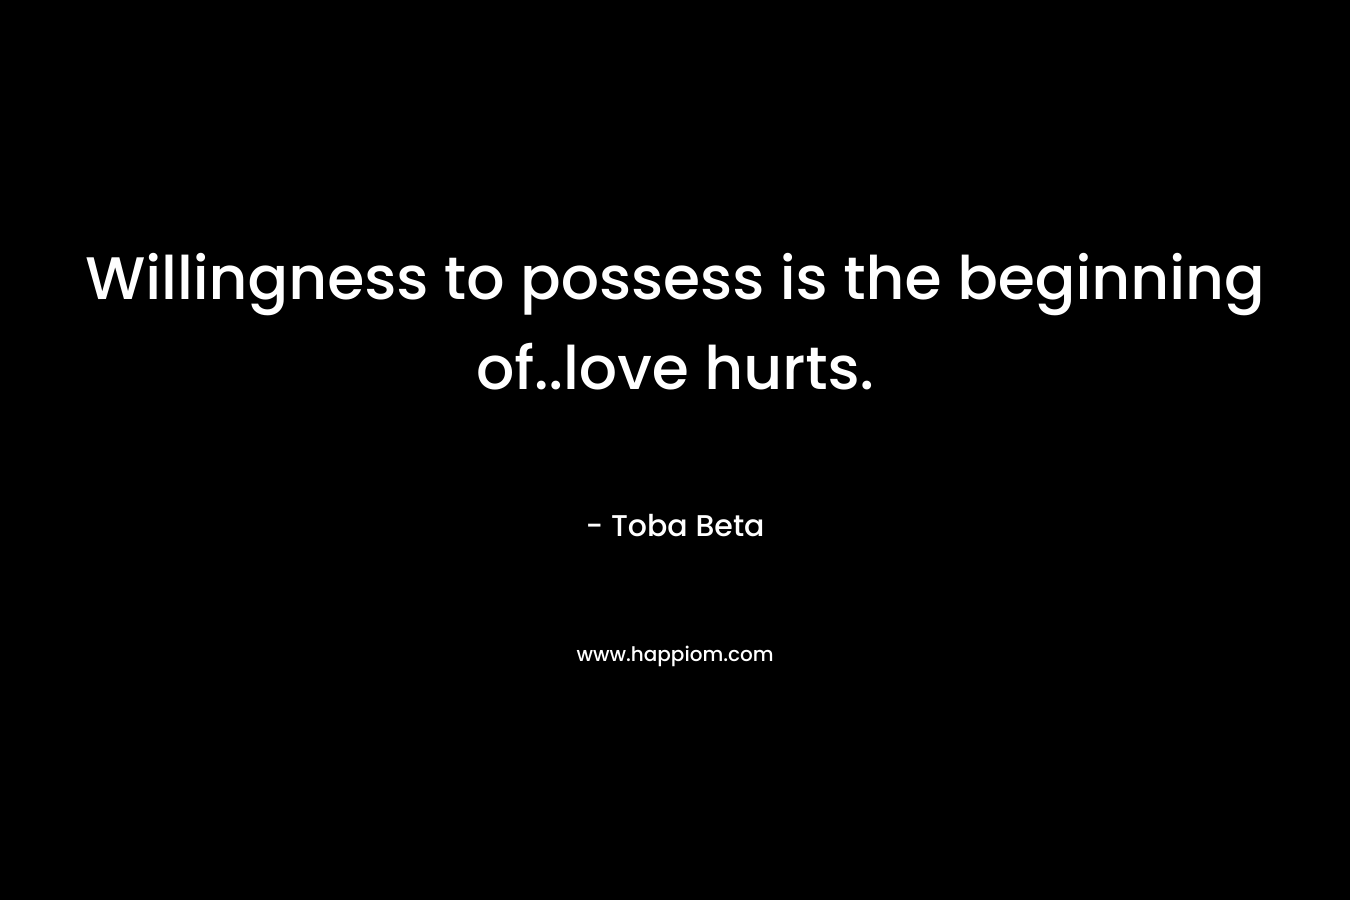 Willingness to possess is the beginning of..love hurts. – Toba Beta